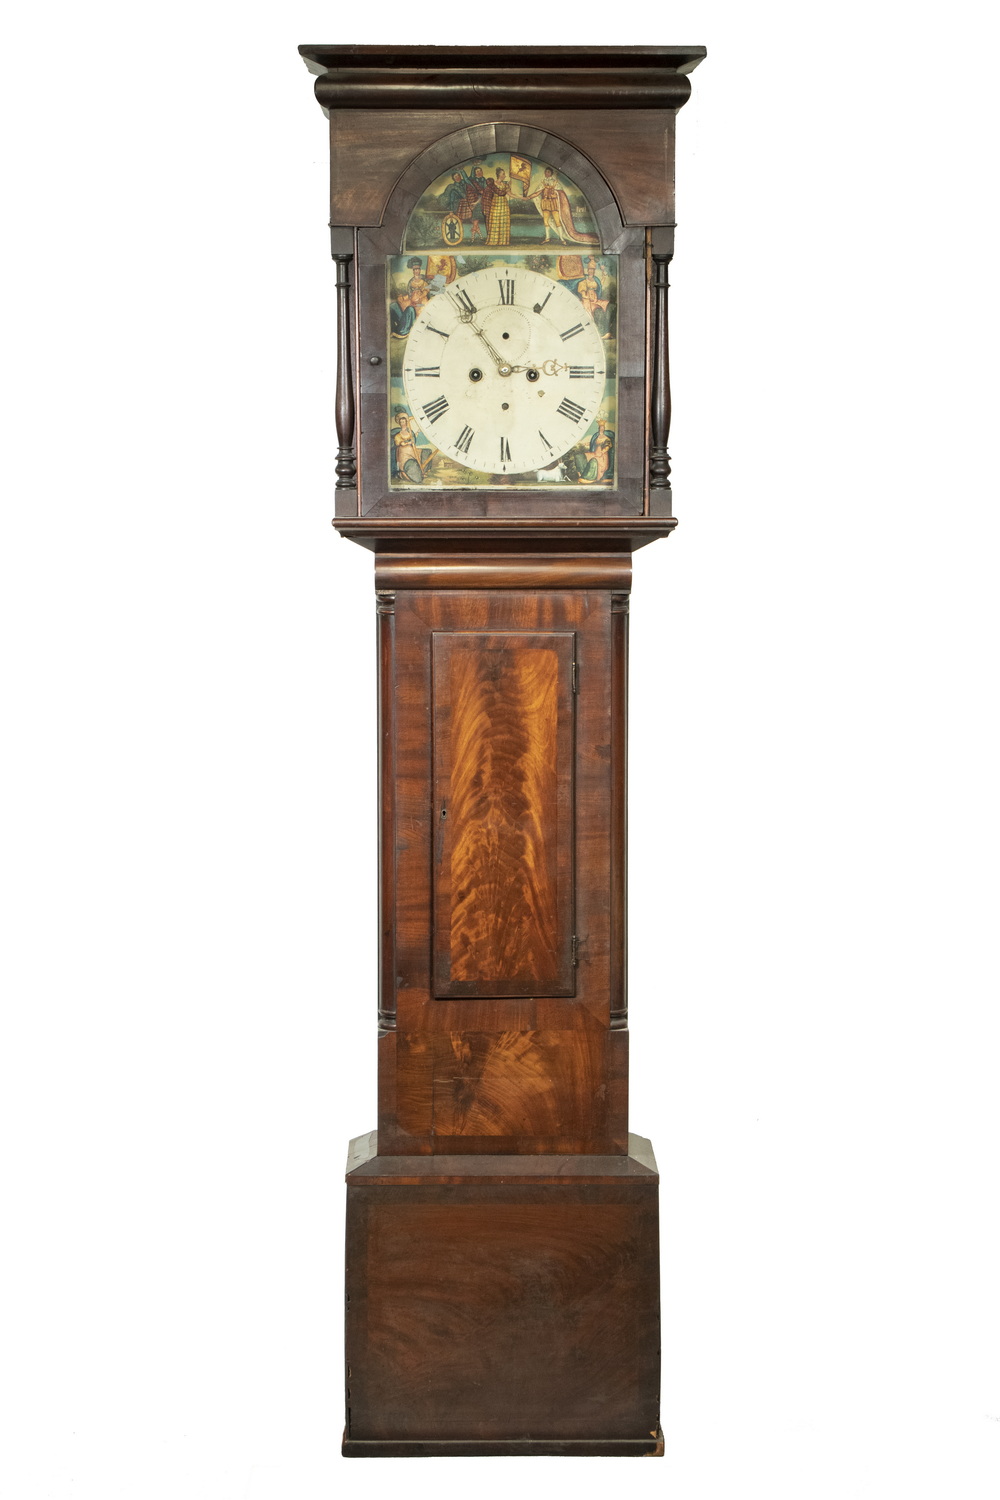 TALL CLOCK COMMEMORATING THE UNION